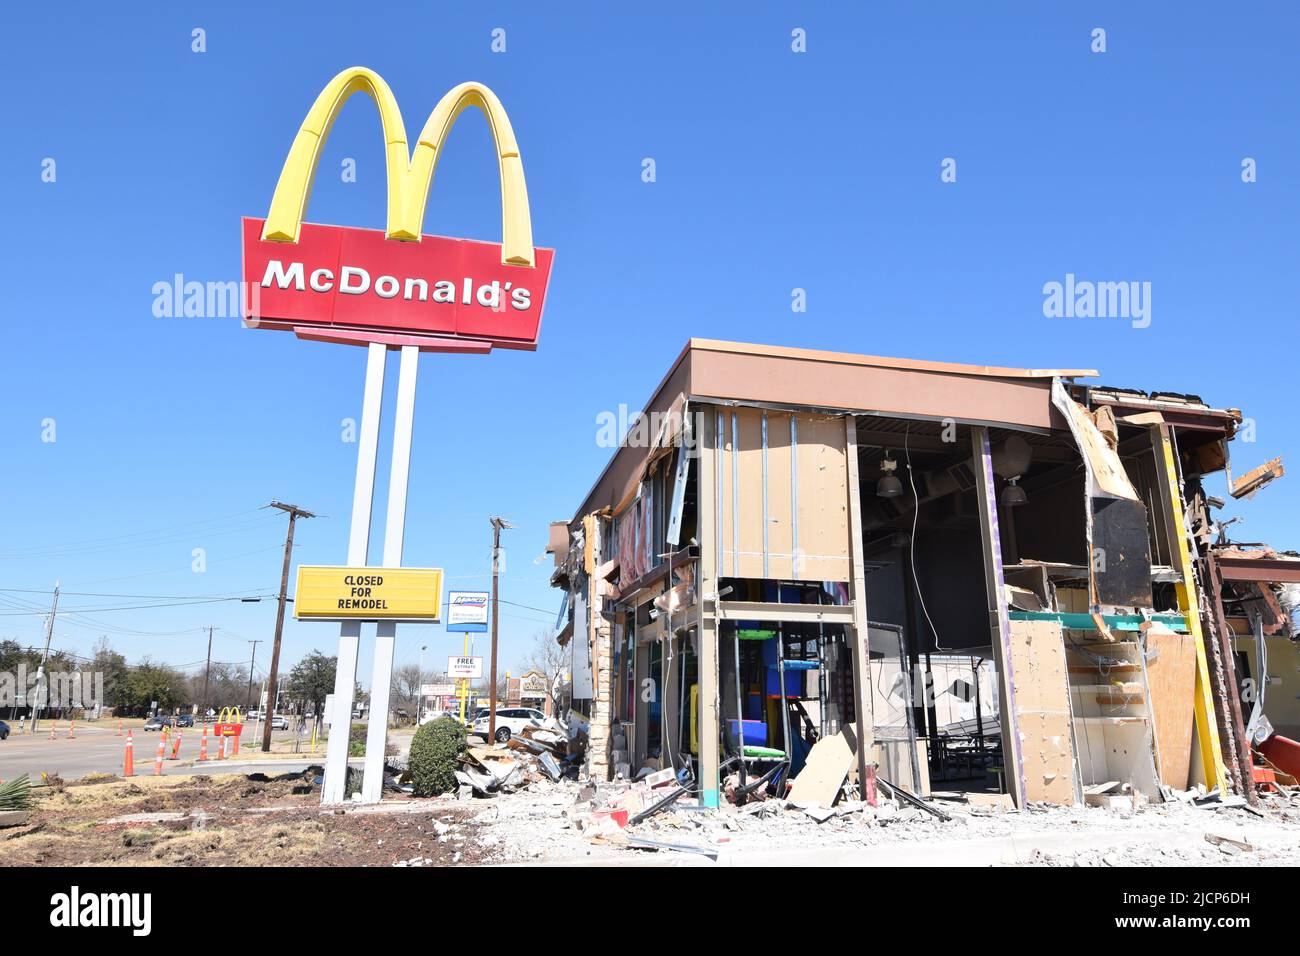 Construction workers demolishing a McDonald's Restaurant in Irving, Texas, soon to be remodeled Stock Photo